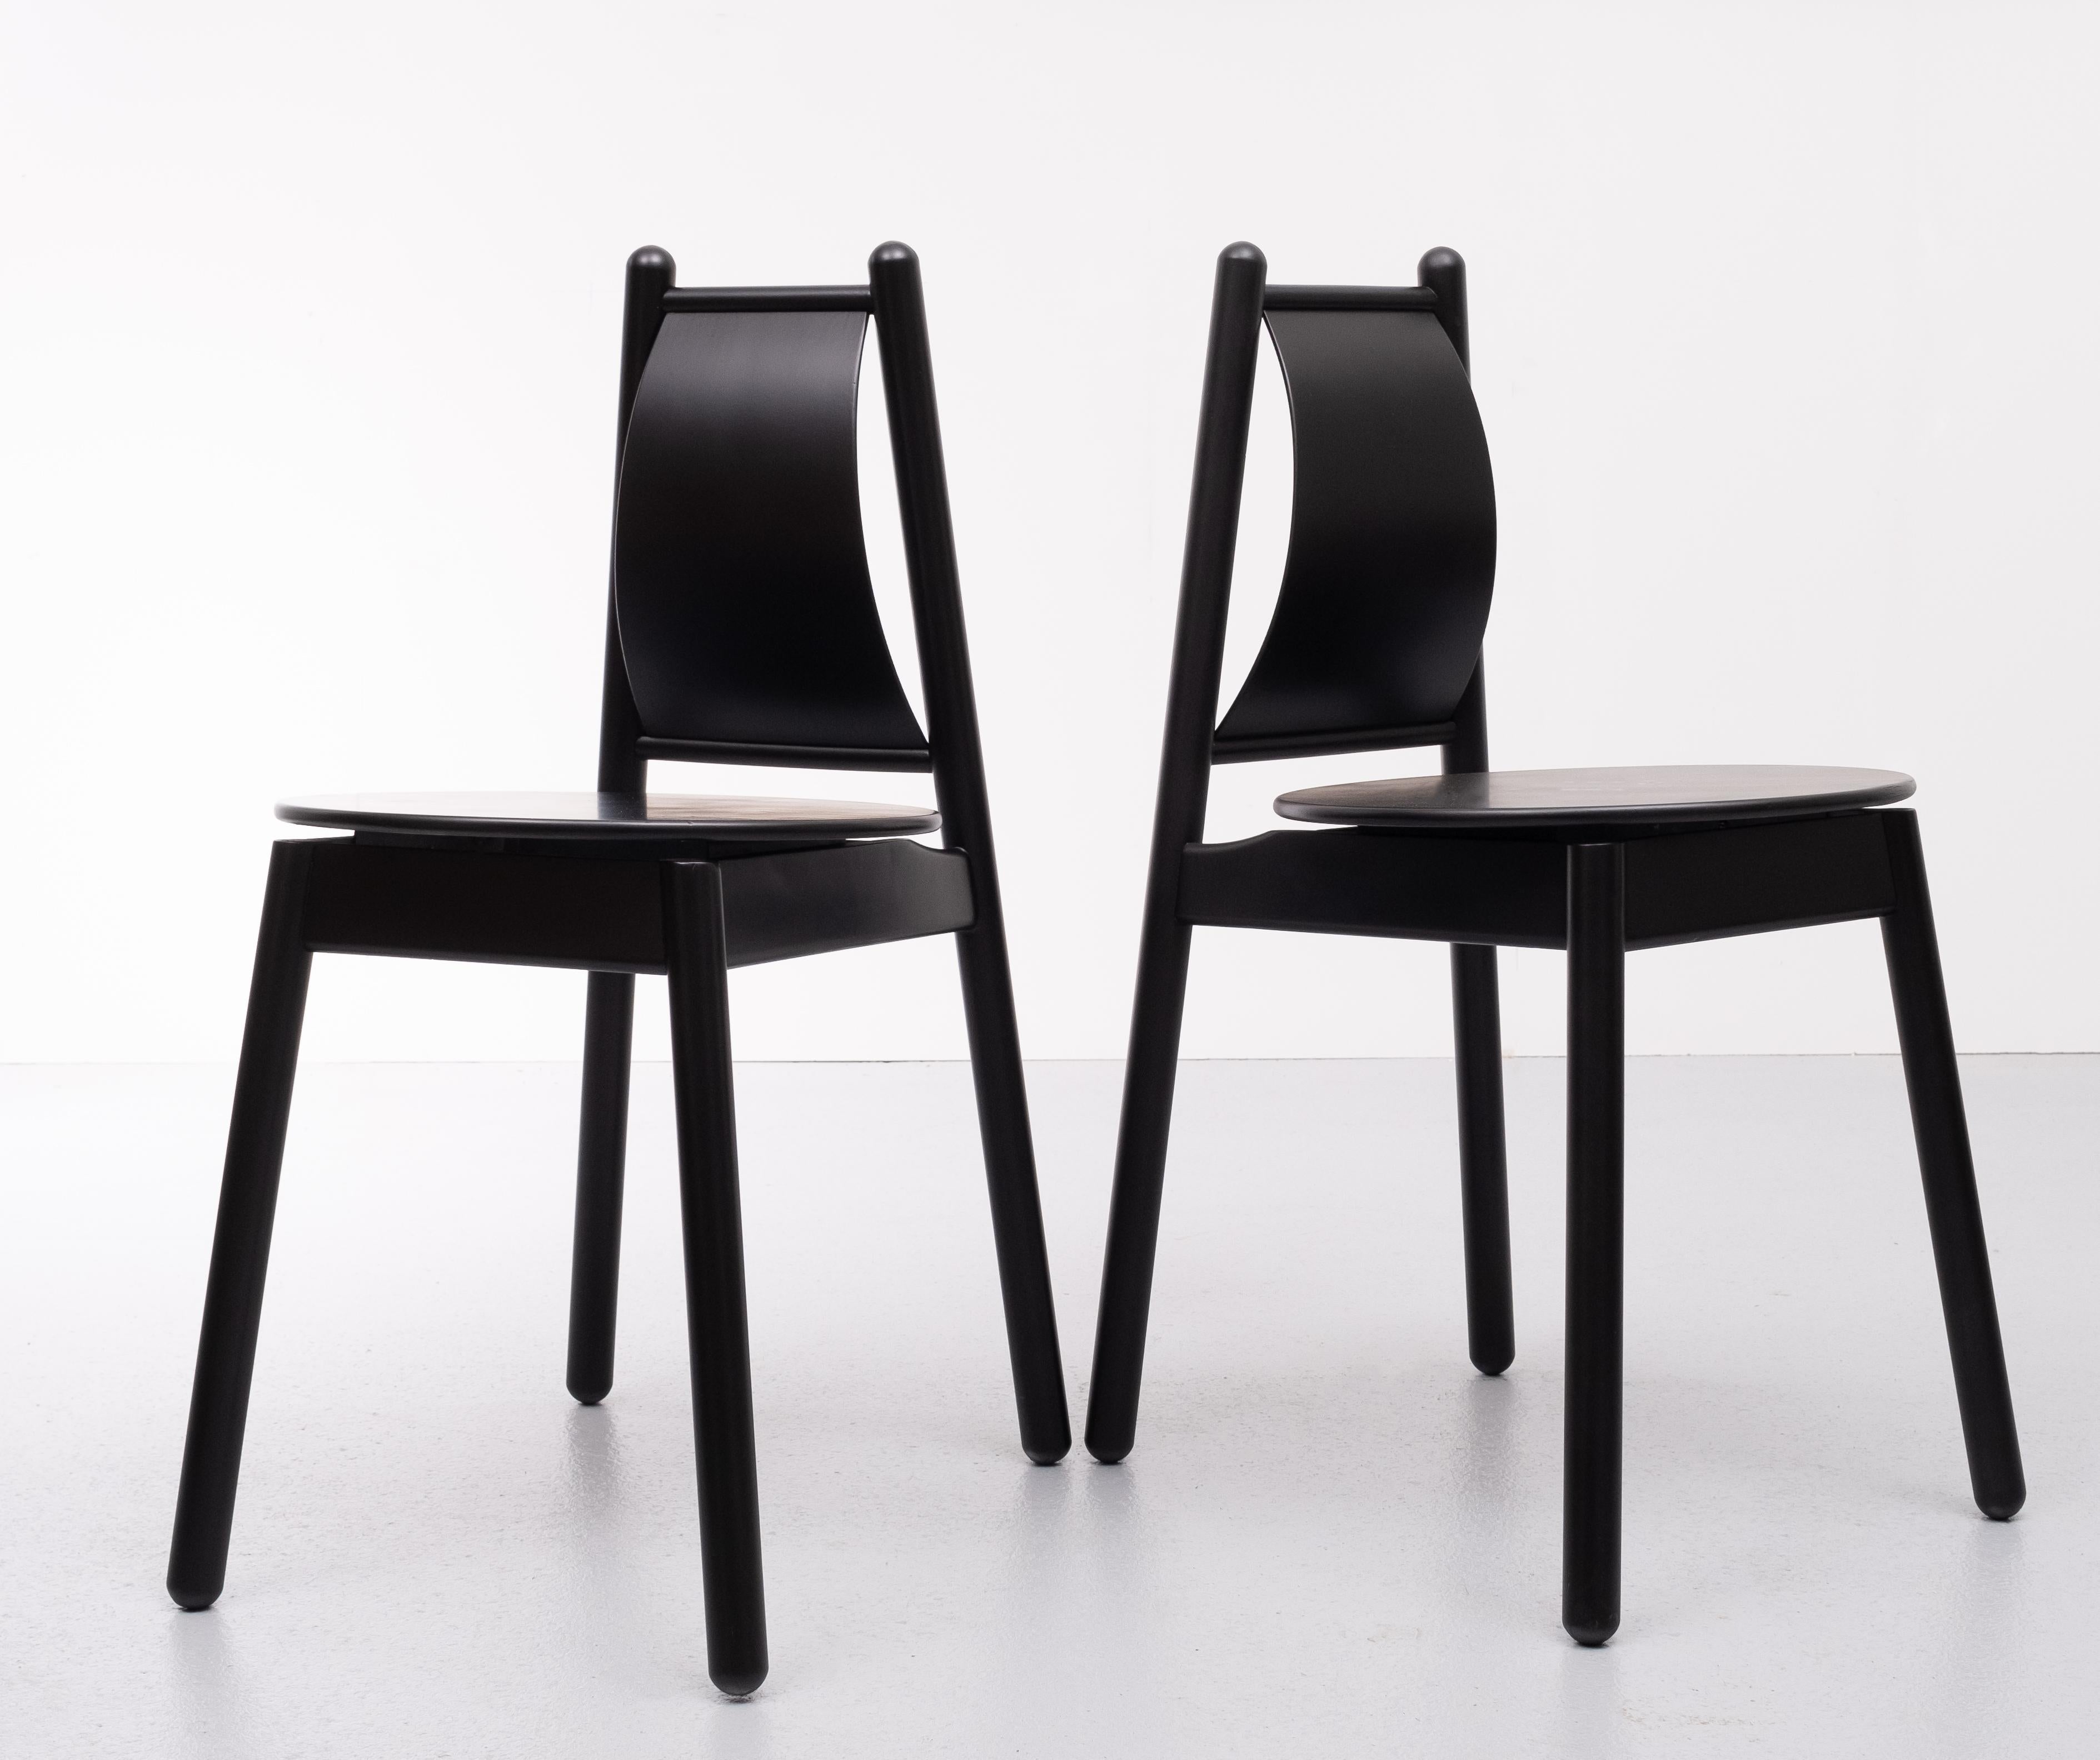 Unique design these small black side chairs. Great looking chairs. Underneath the chair there is 
a sticker. S aying Design Vico Magistretti purchased 1993 by a well now furniture design dealer.